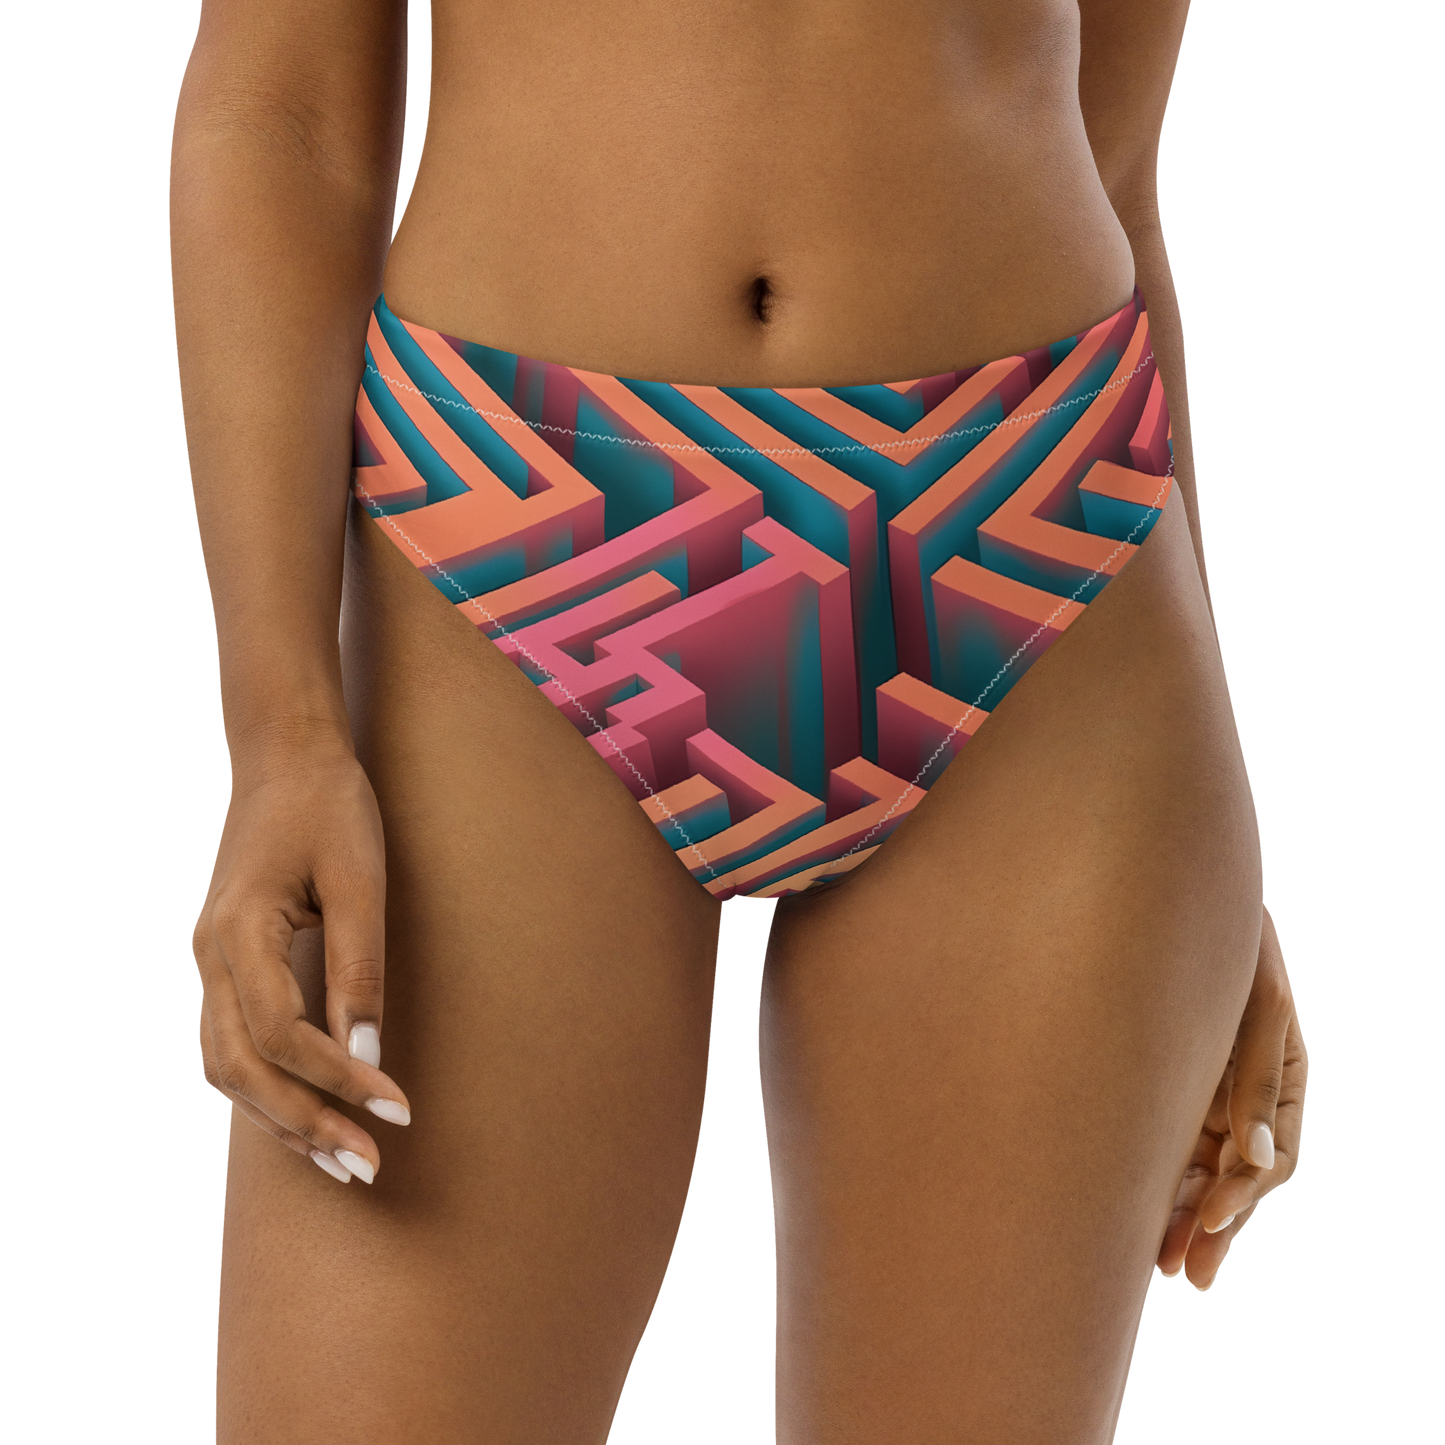 3D Maze Illusion | 3D Patterns | All-Over Print Recycled High-Waisted Bikini Bottom - #1